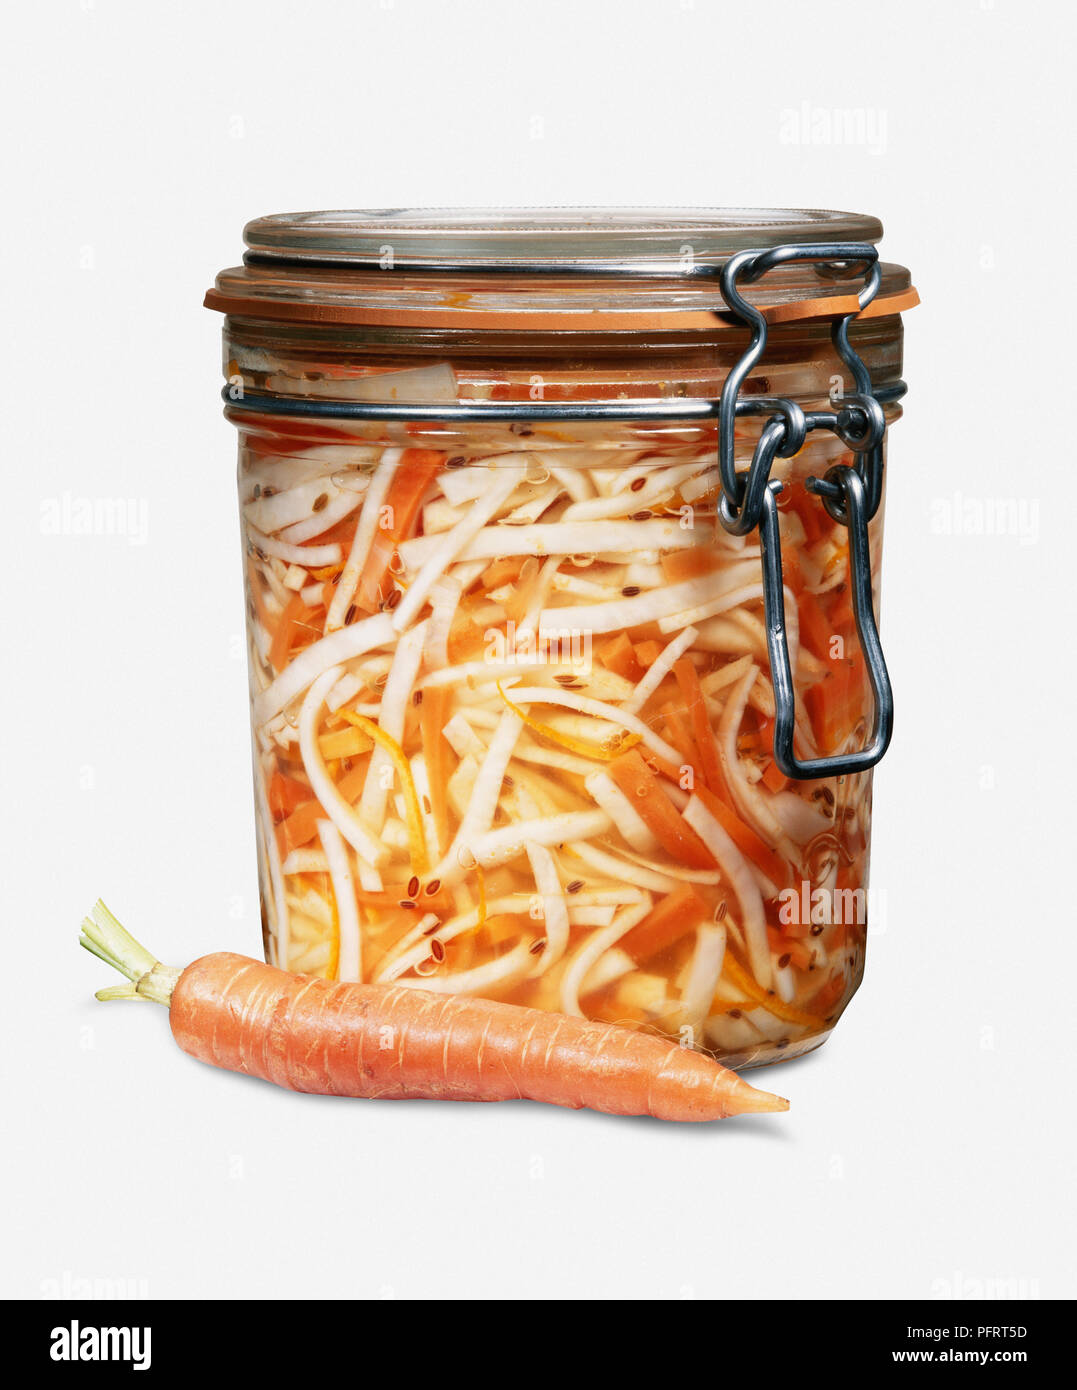 Jar of pickled celeriac and carrot salad Stock Photo